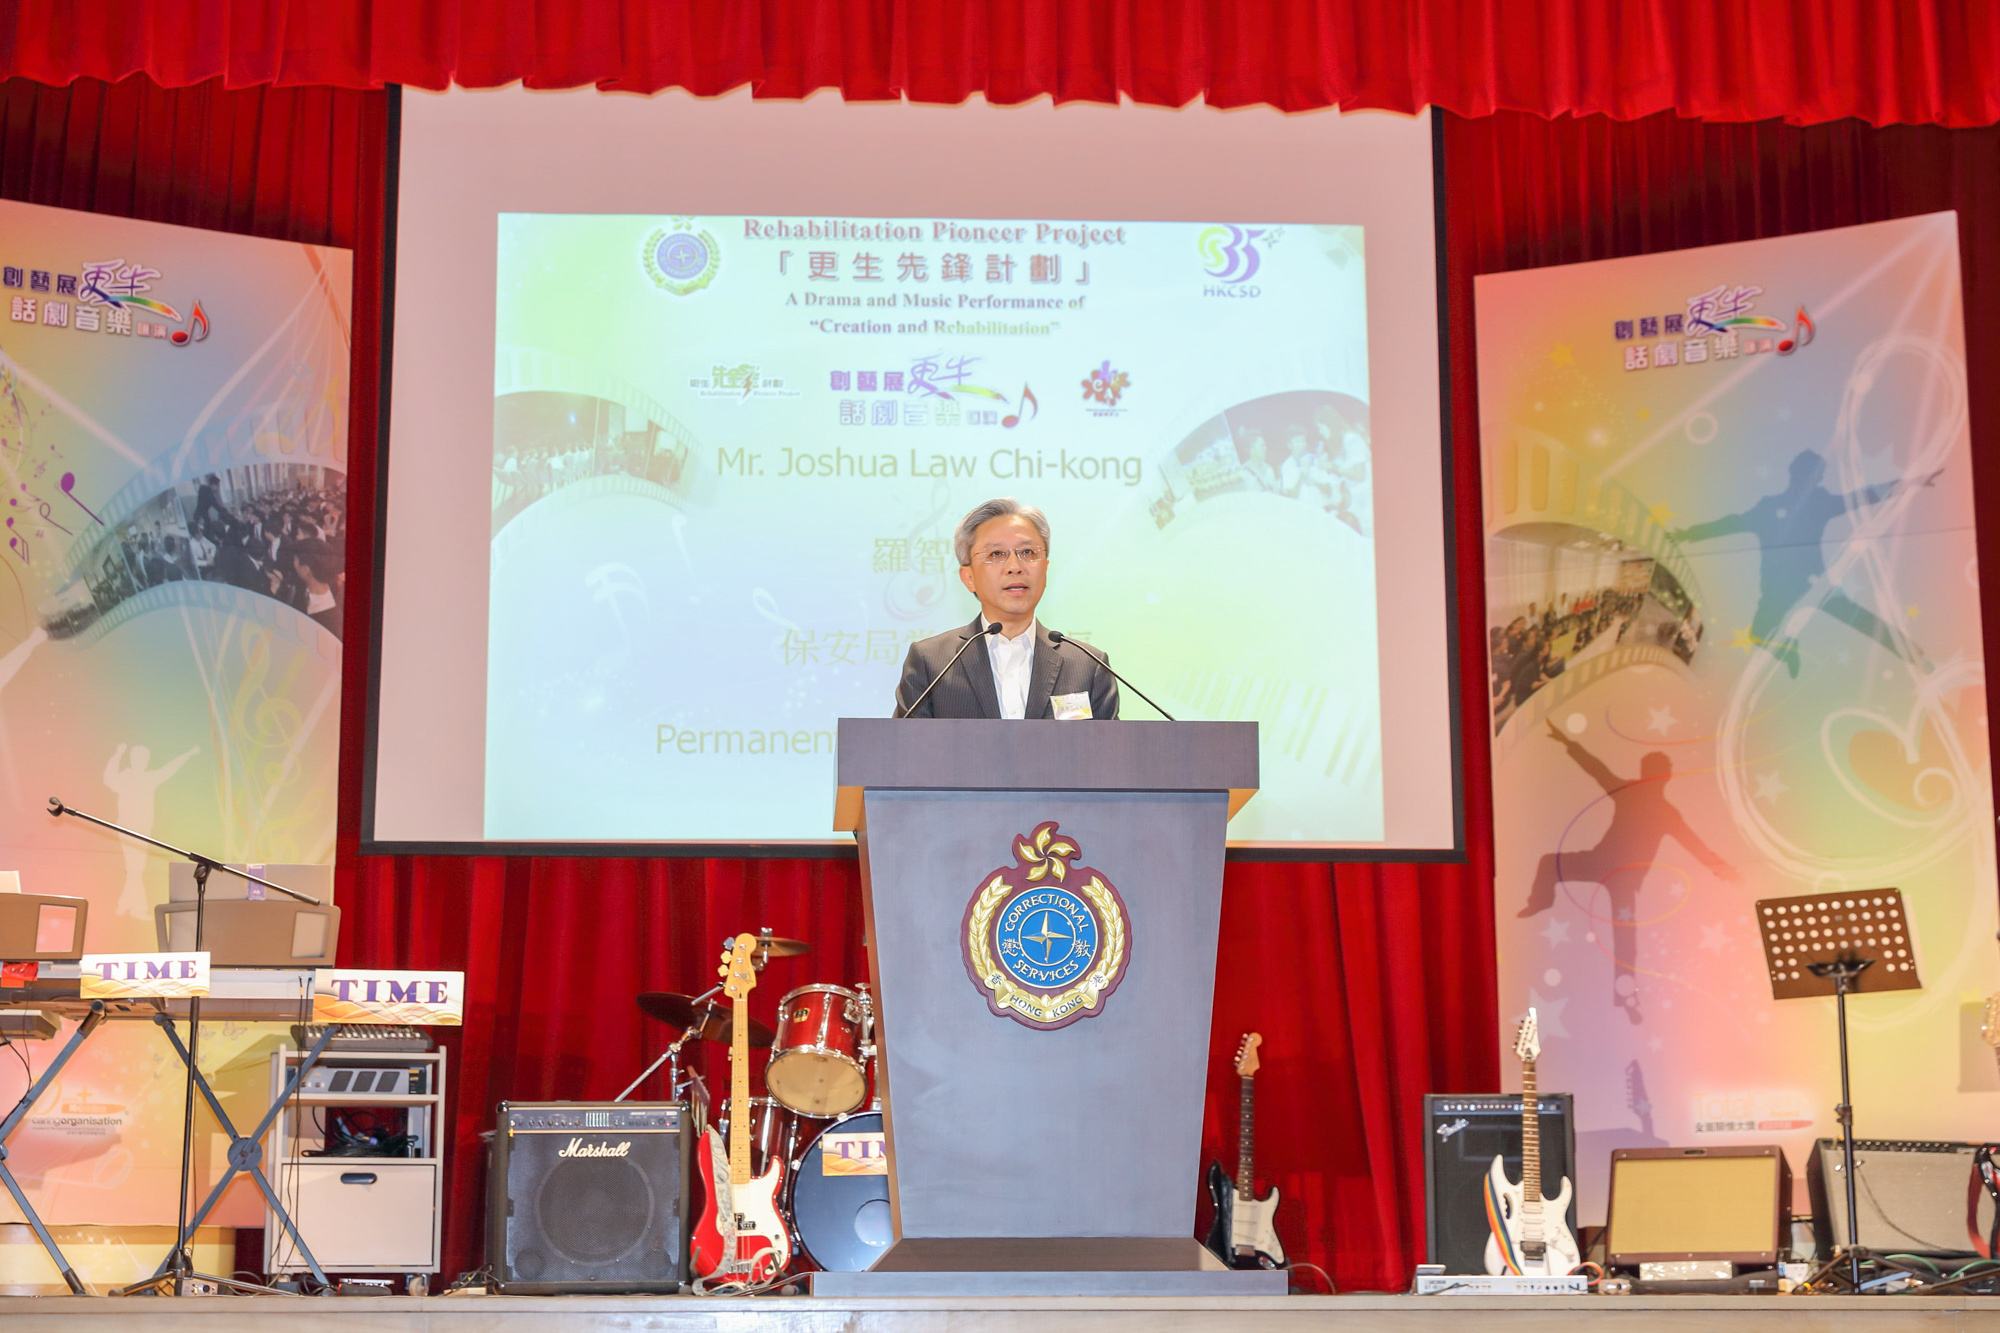 The then Permanent Secretary for Security, Mr Joshua Law Chi-kong, JP, officiated at a drama and music performance of “Creation and Rehabilitation” on June 28, 2017.